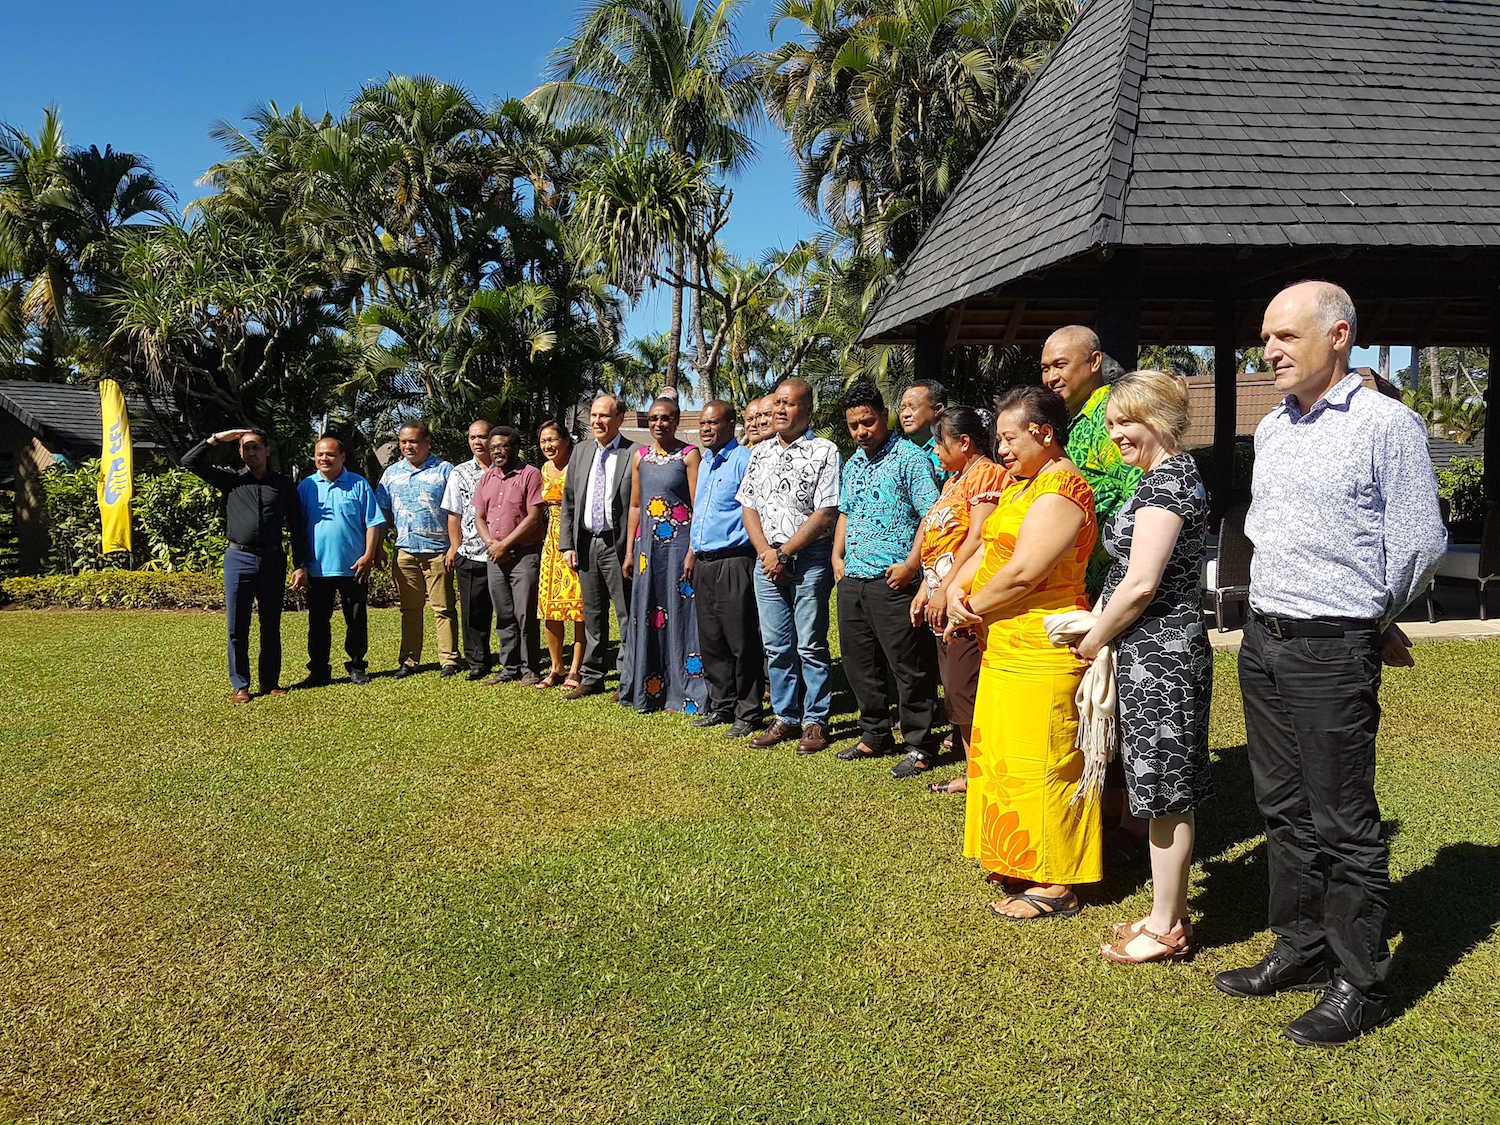 This was the first capacity development workshop held by ICANN for Pacific GAC Members.